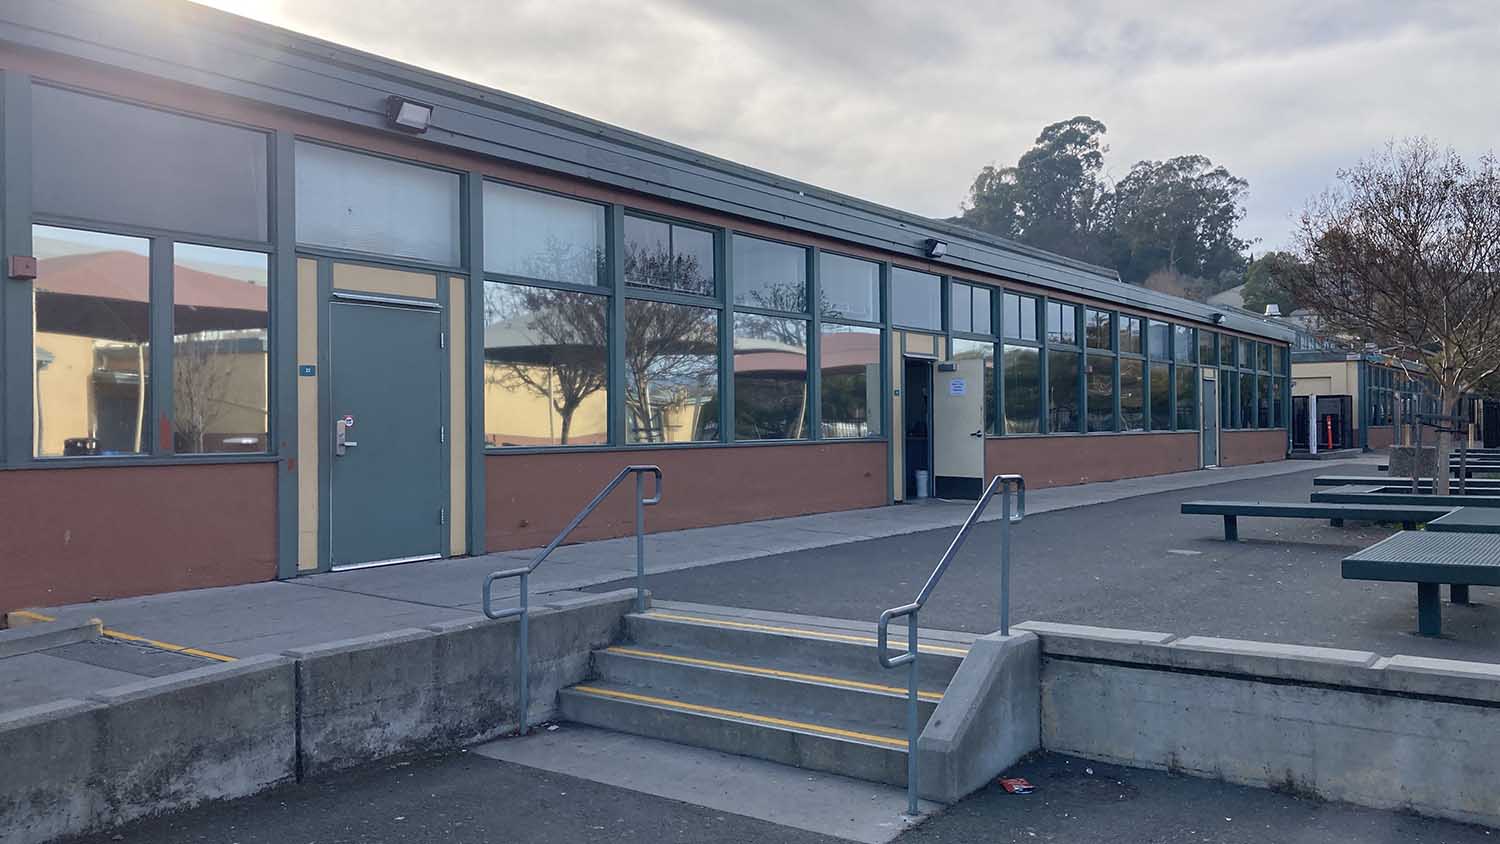 Window Film for a Middle School in San Rafael, CA, installed by ClimatePro, the San Francisco Bay Area Window Film Leader.